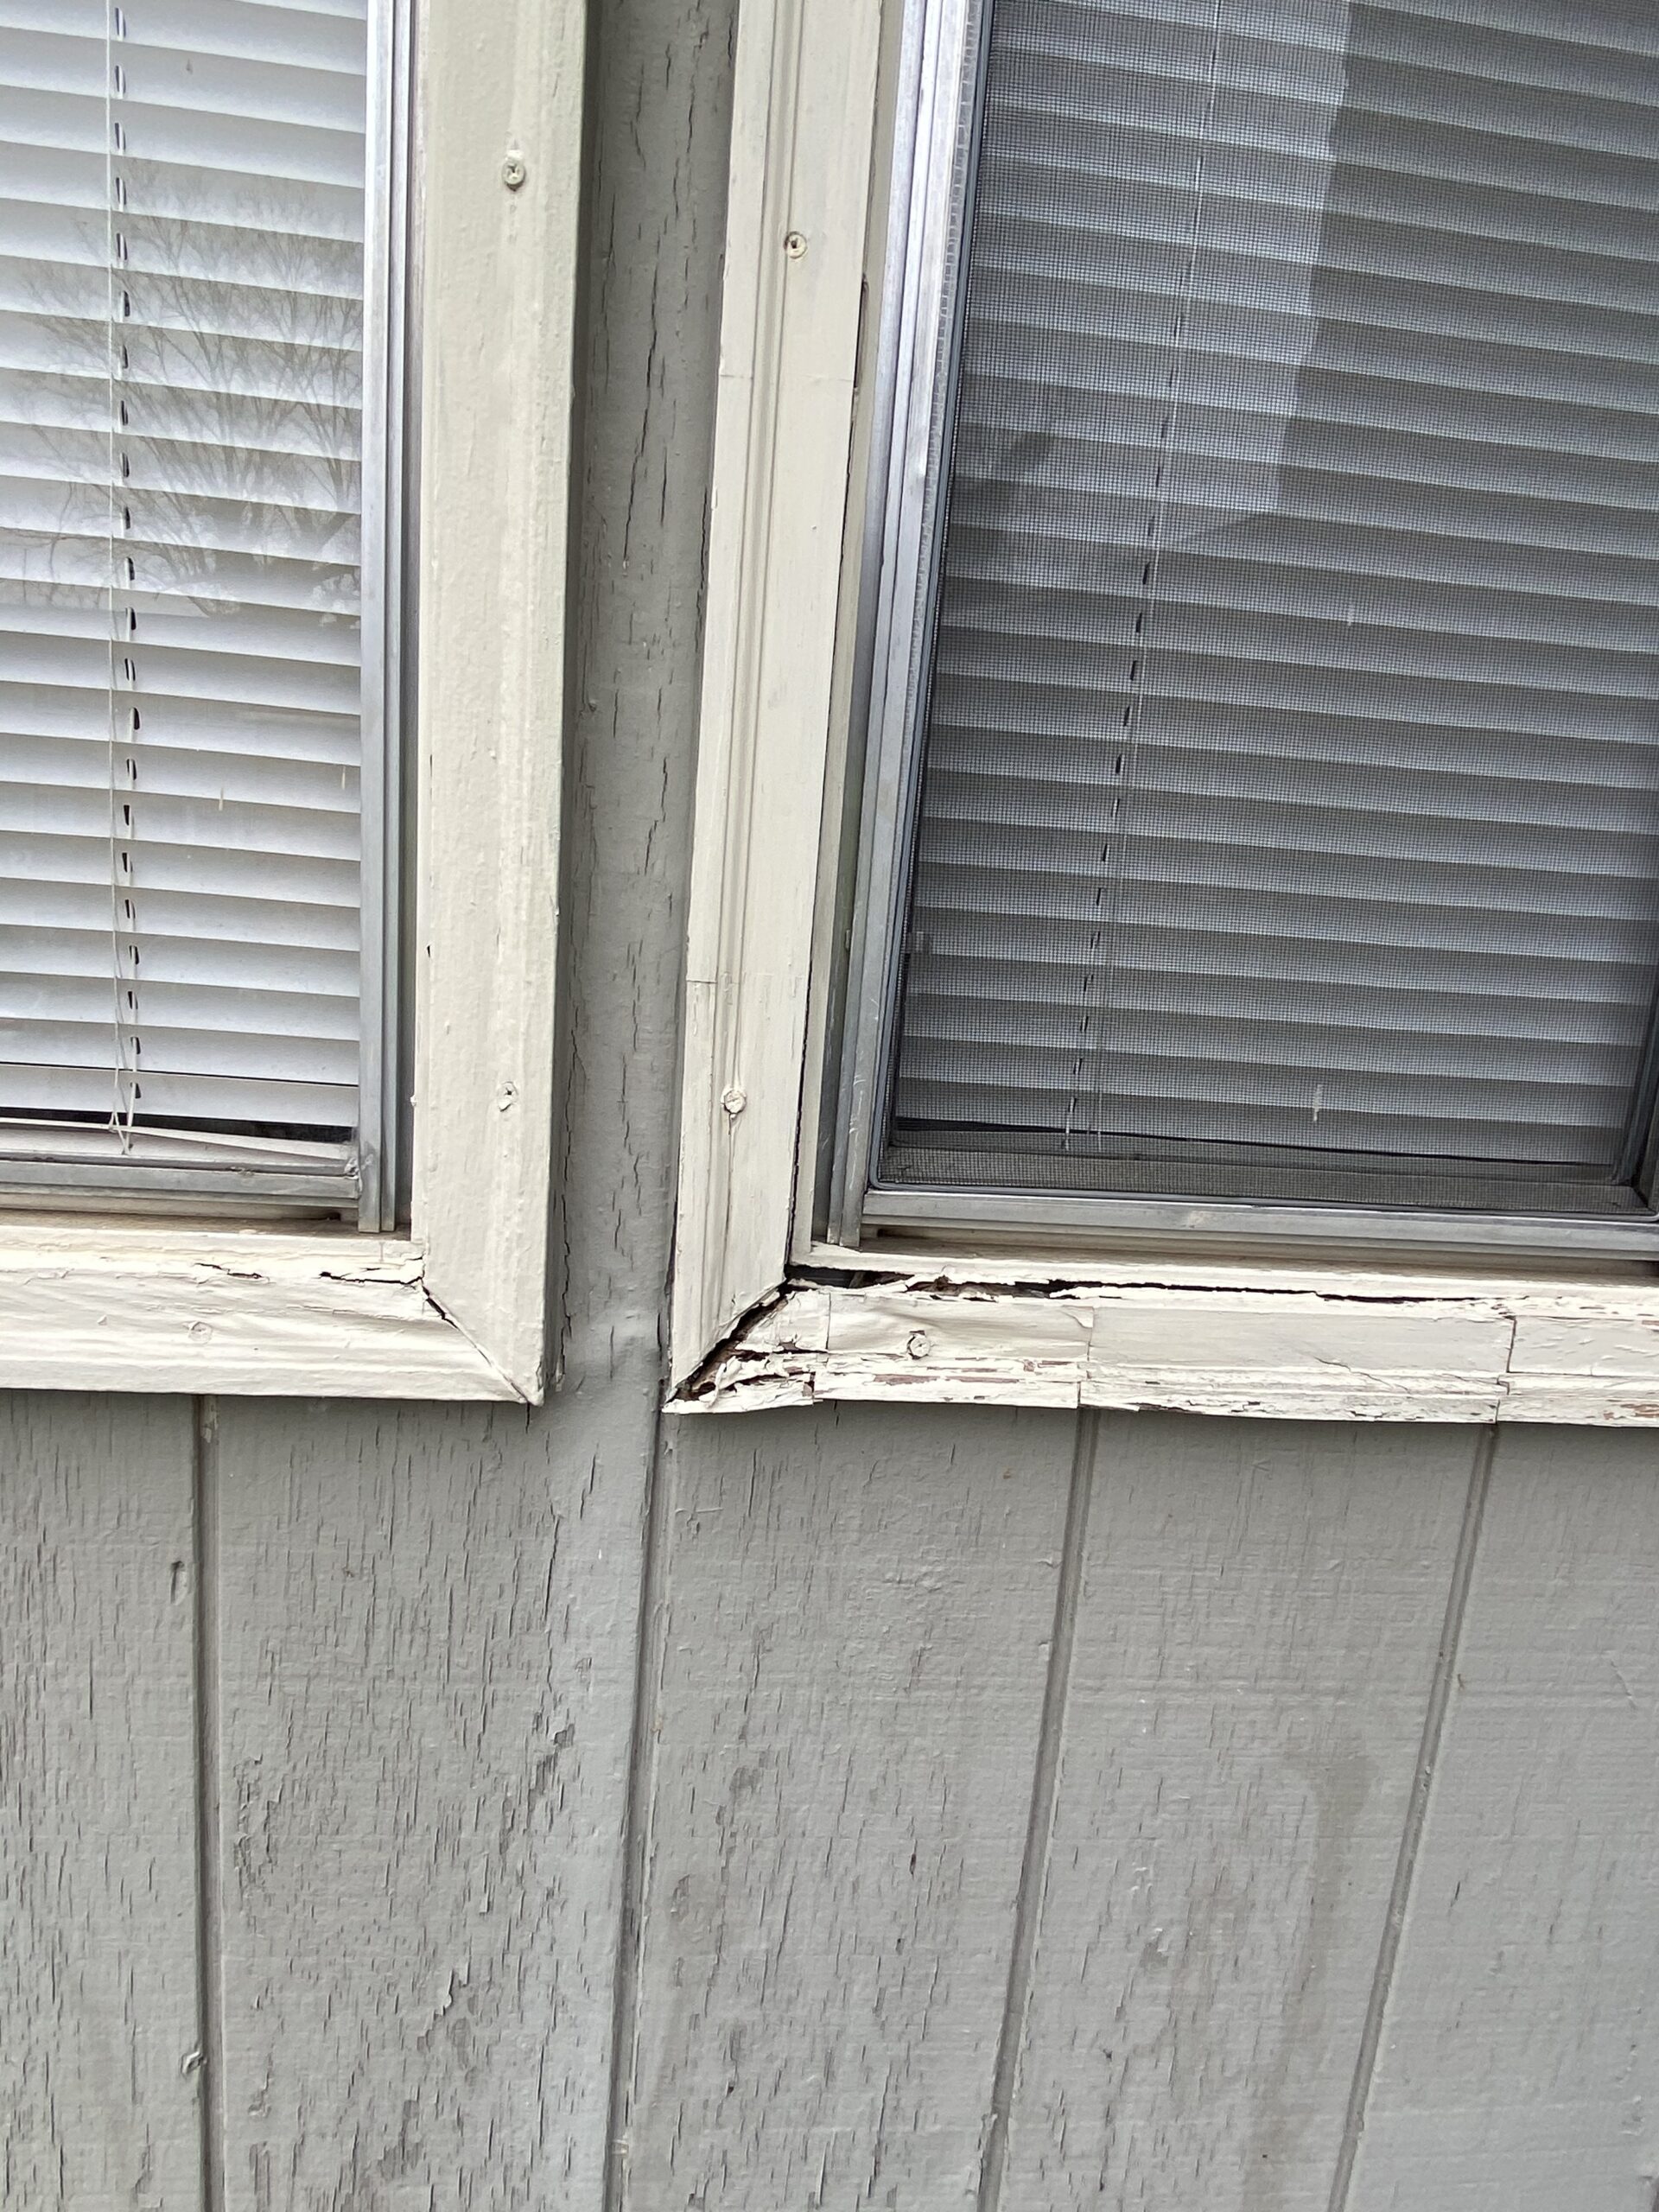 This is a picture of a window with some rotten trim boards in Knoxville Tennessee